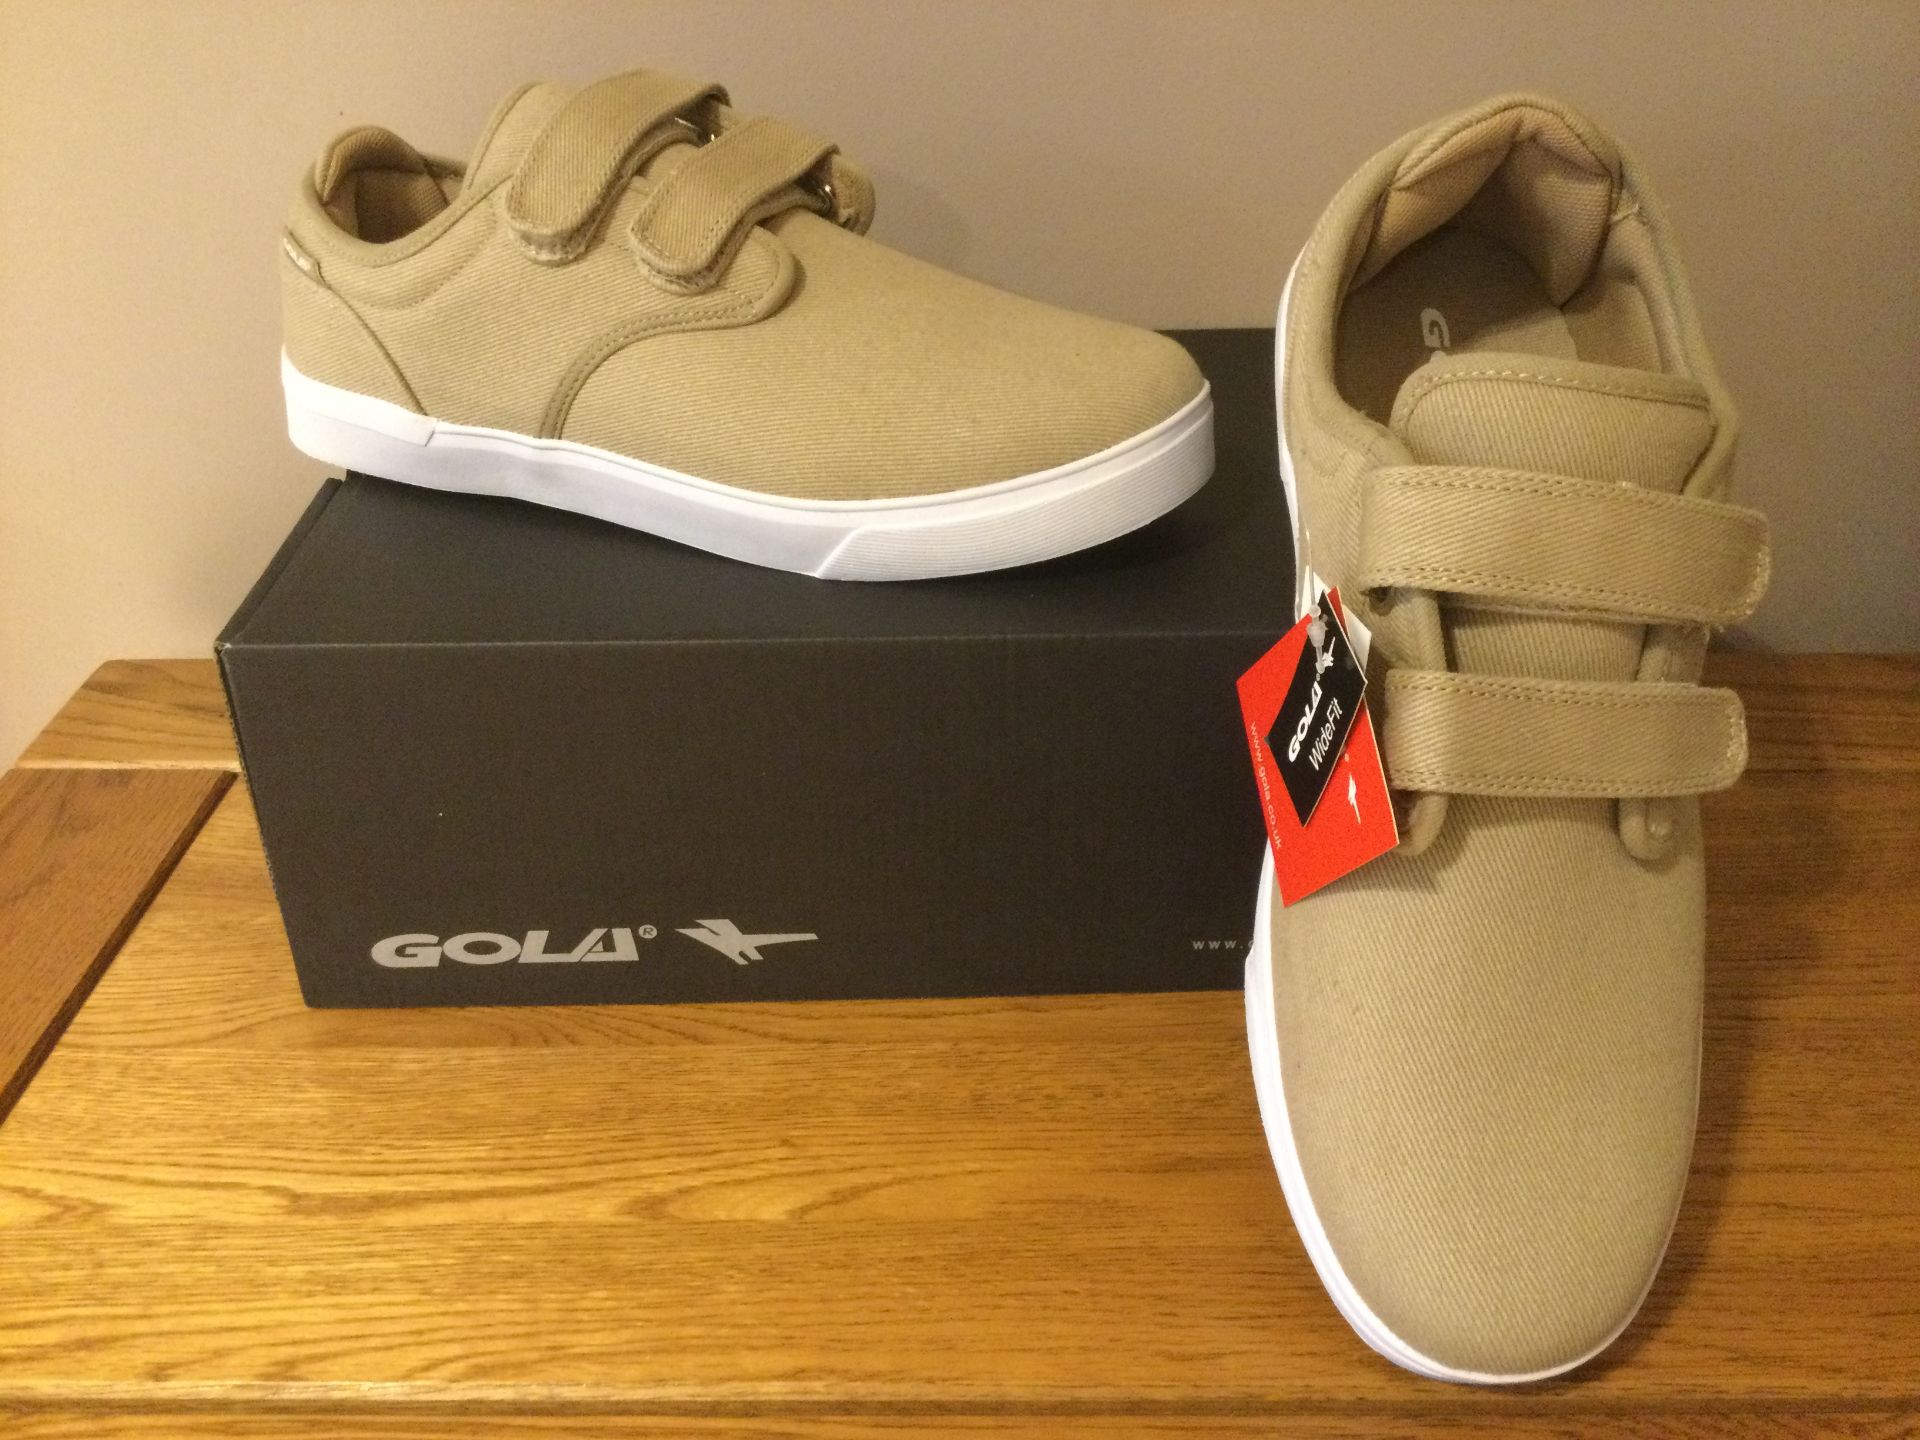 Gola “Panama” QF Men's Wide Fit Trainers, Size 11, Taupe/White - New RRP £36.00 - Image 2 of 5